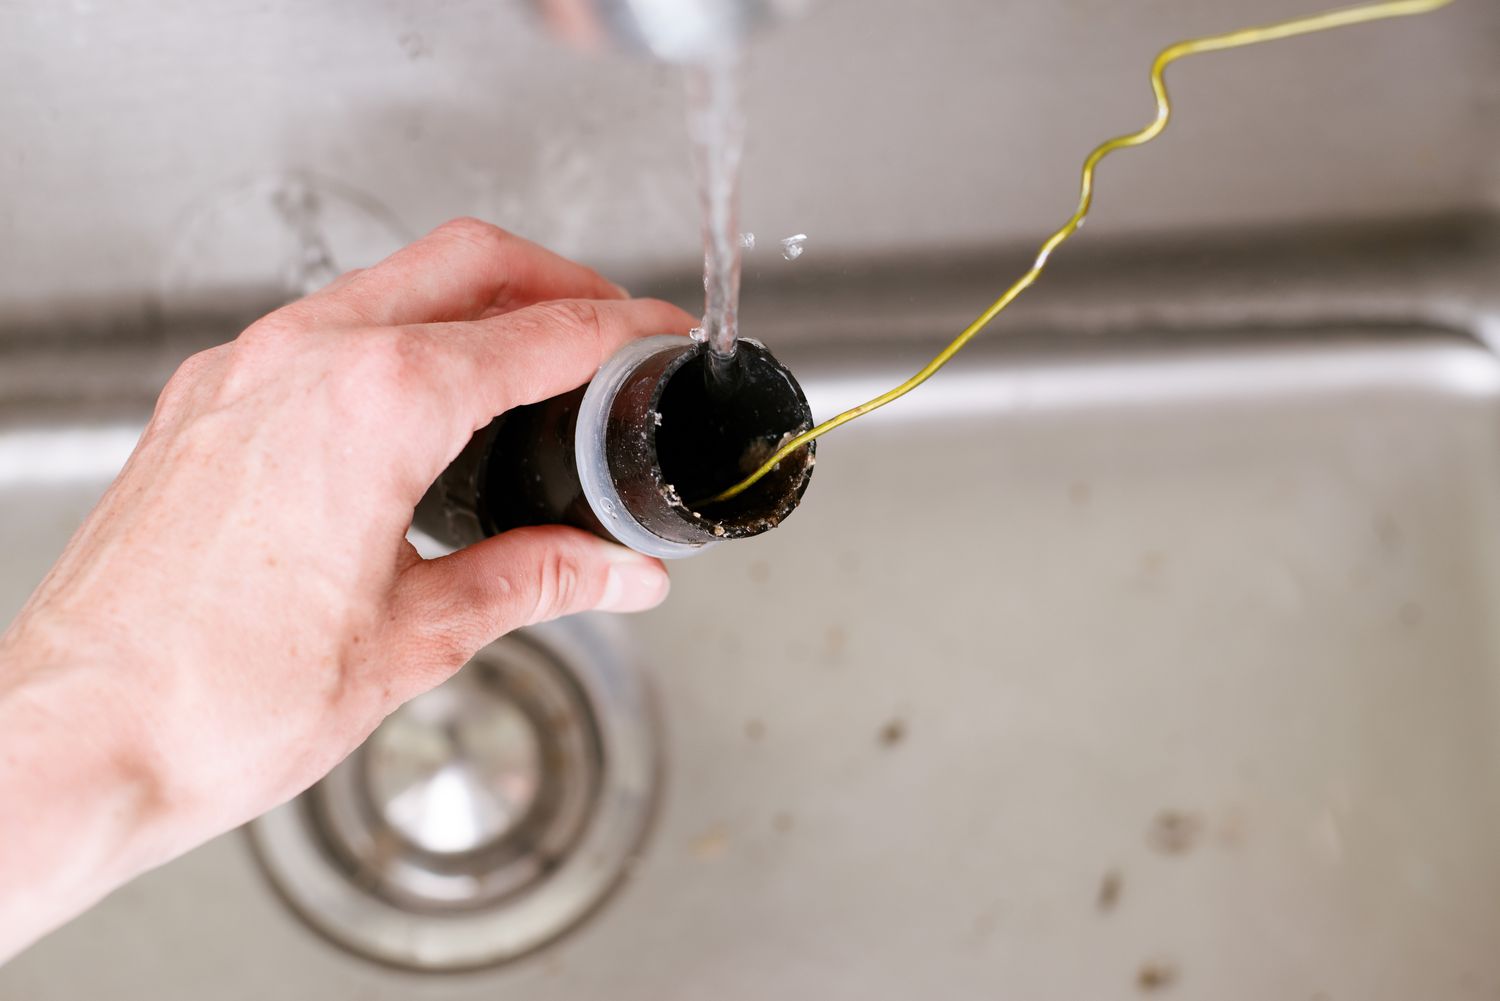 Trap arm in sink garbage disposal checked with yellow wire for clogs